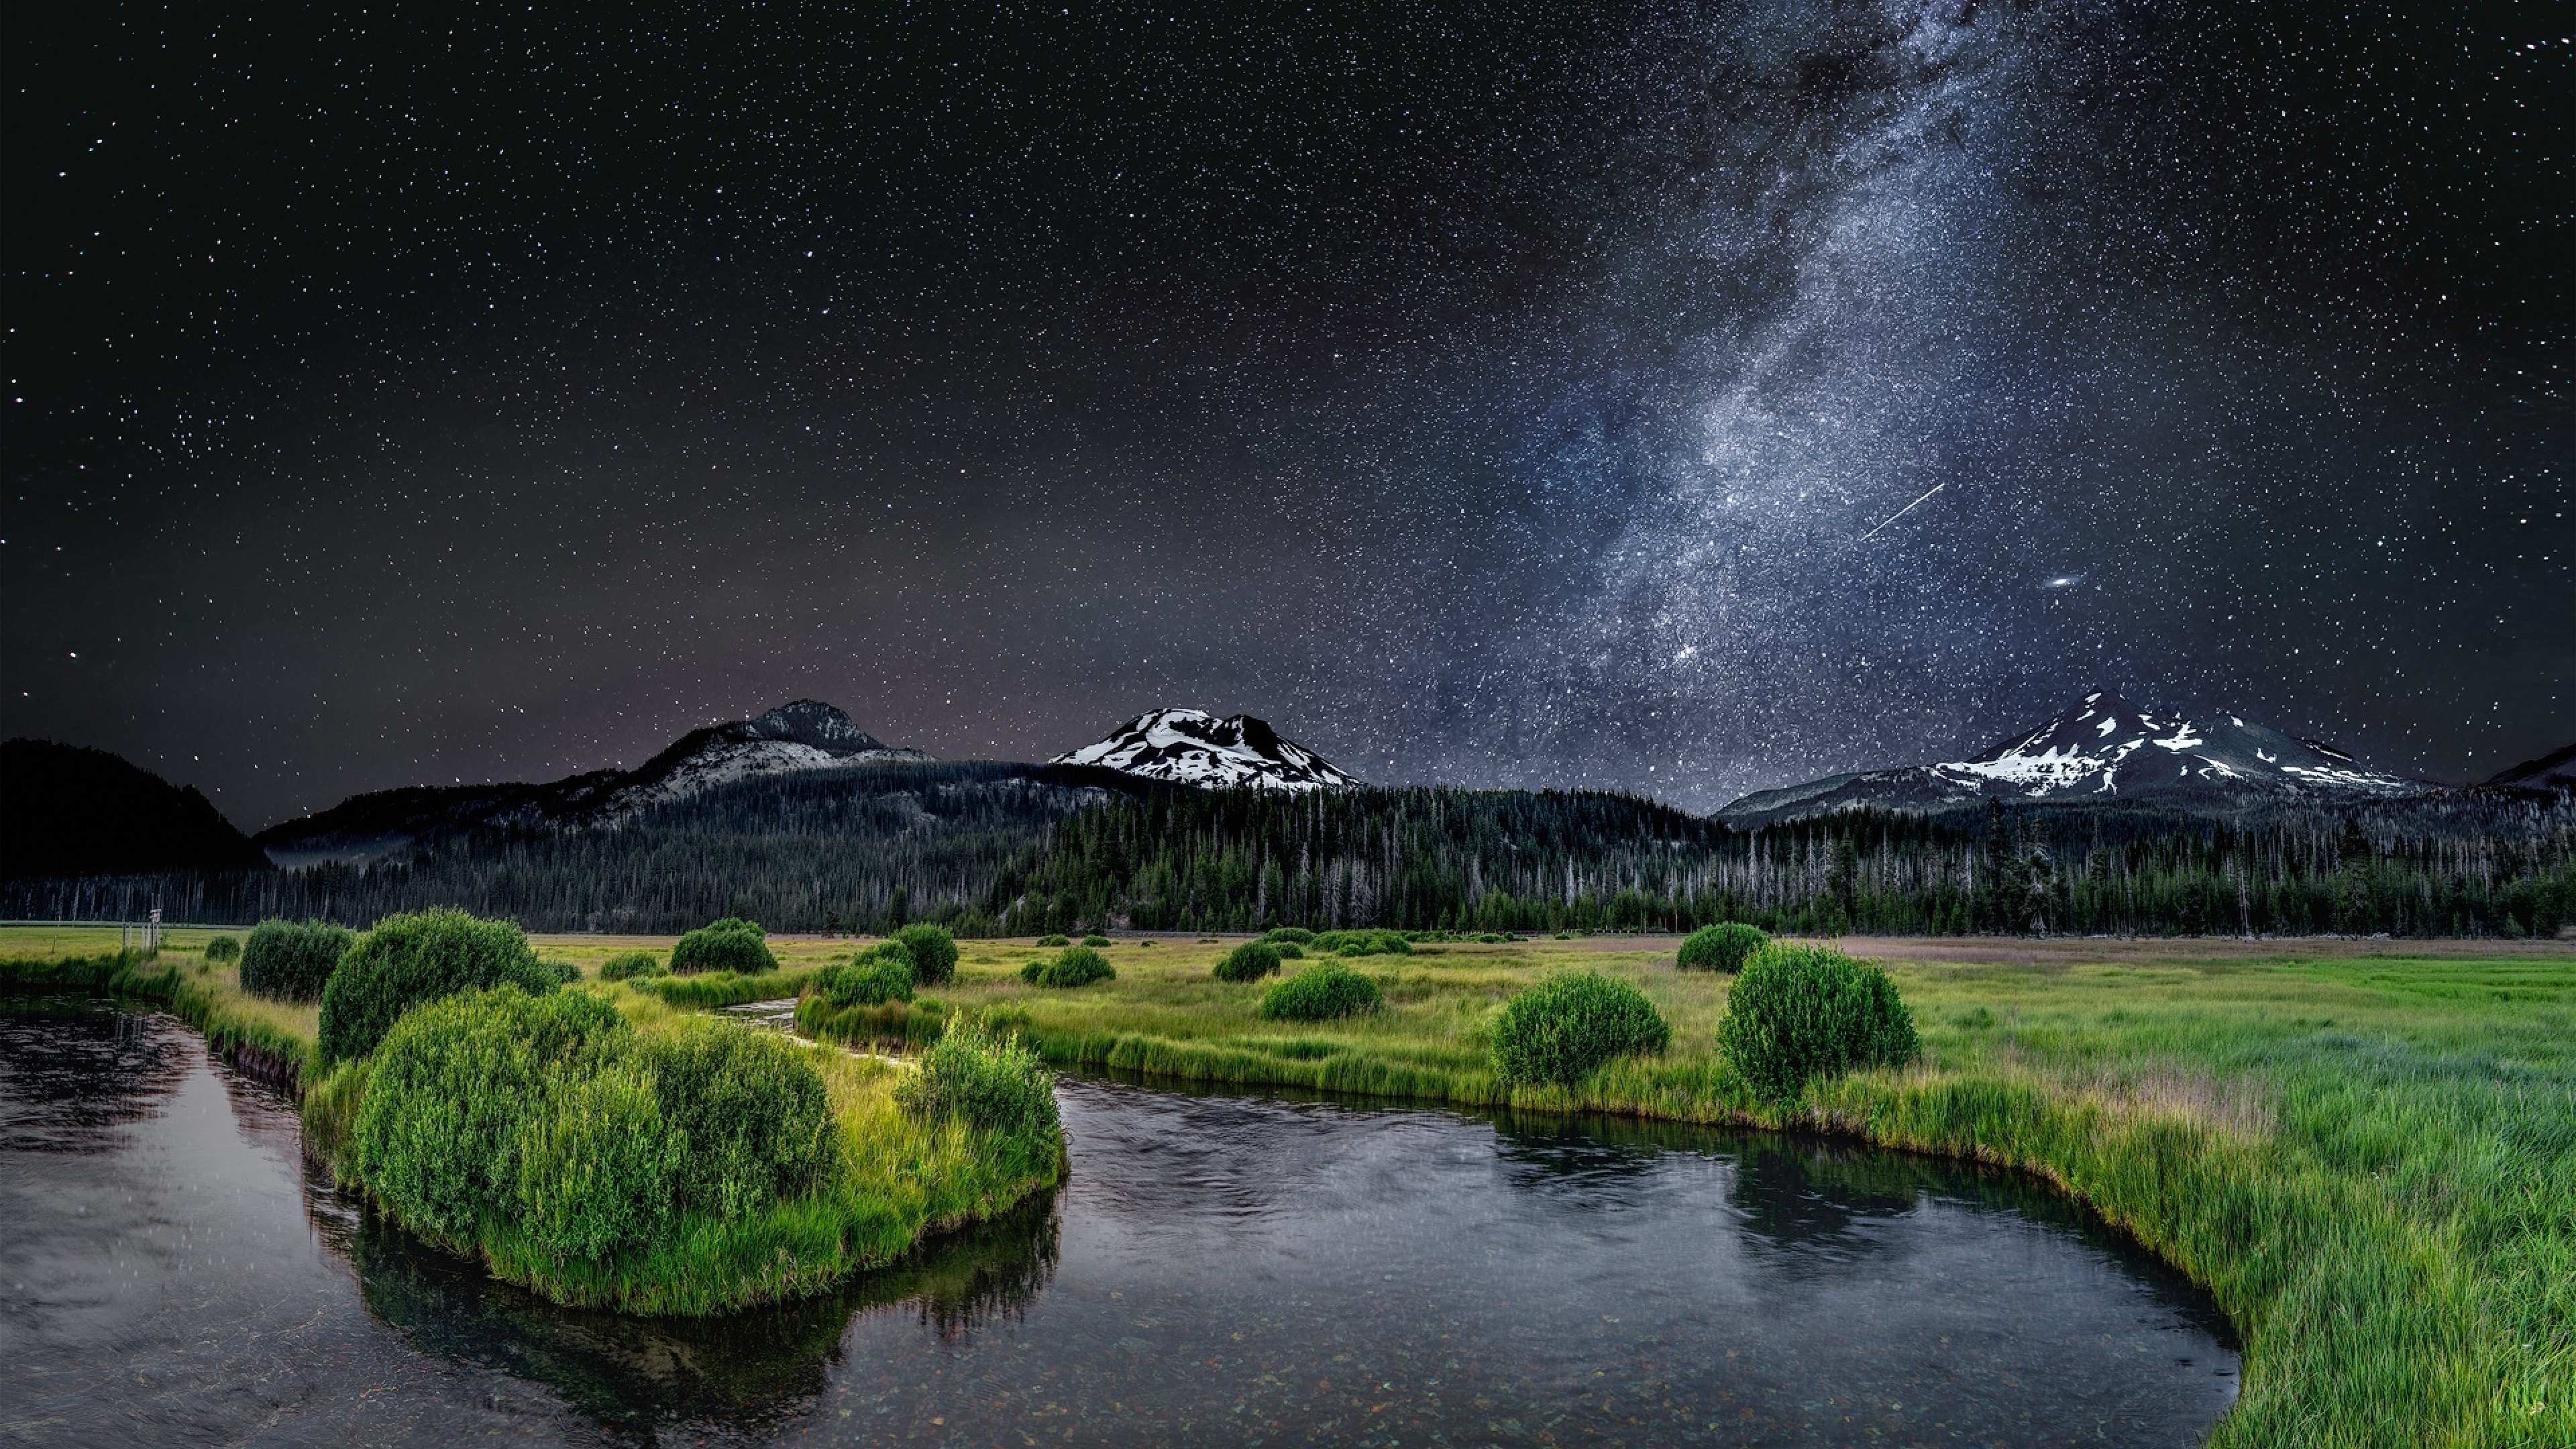 3840x2160 River Near Mountains In Night View 4k Wallpaper Hd Nature 4k